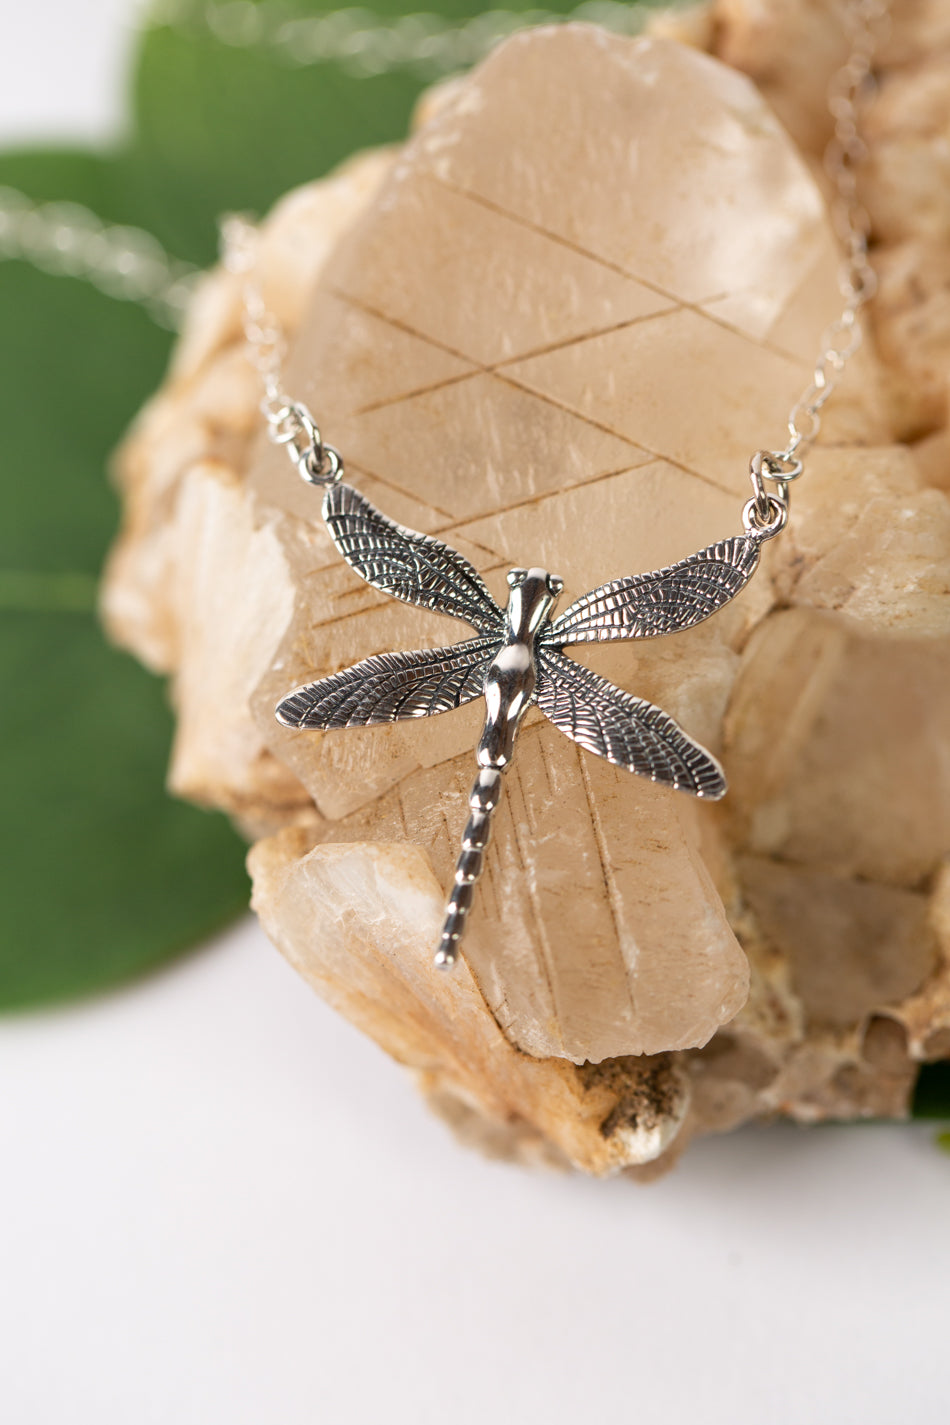 Sentiment 17.25-19.25" Silver Dragonfly Simple Necklace